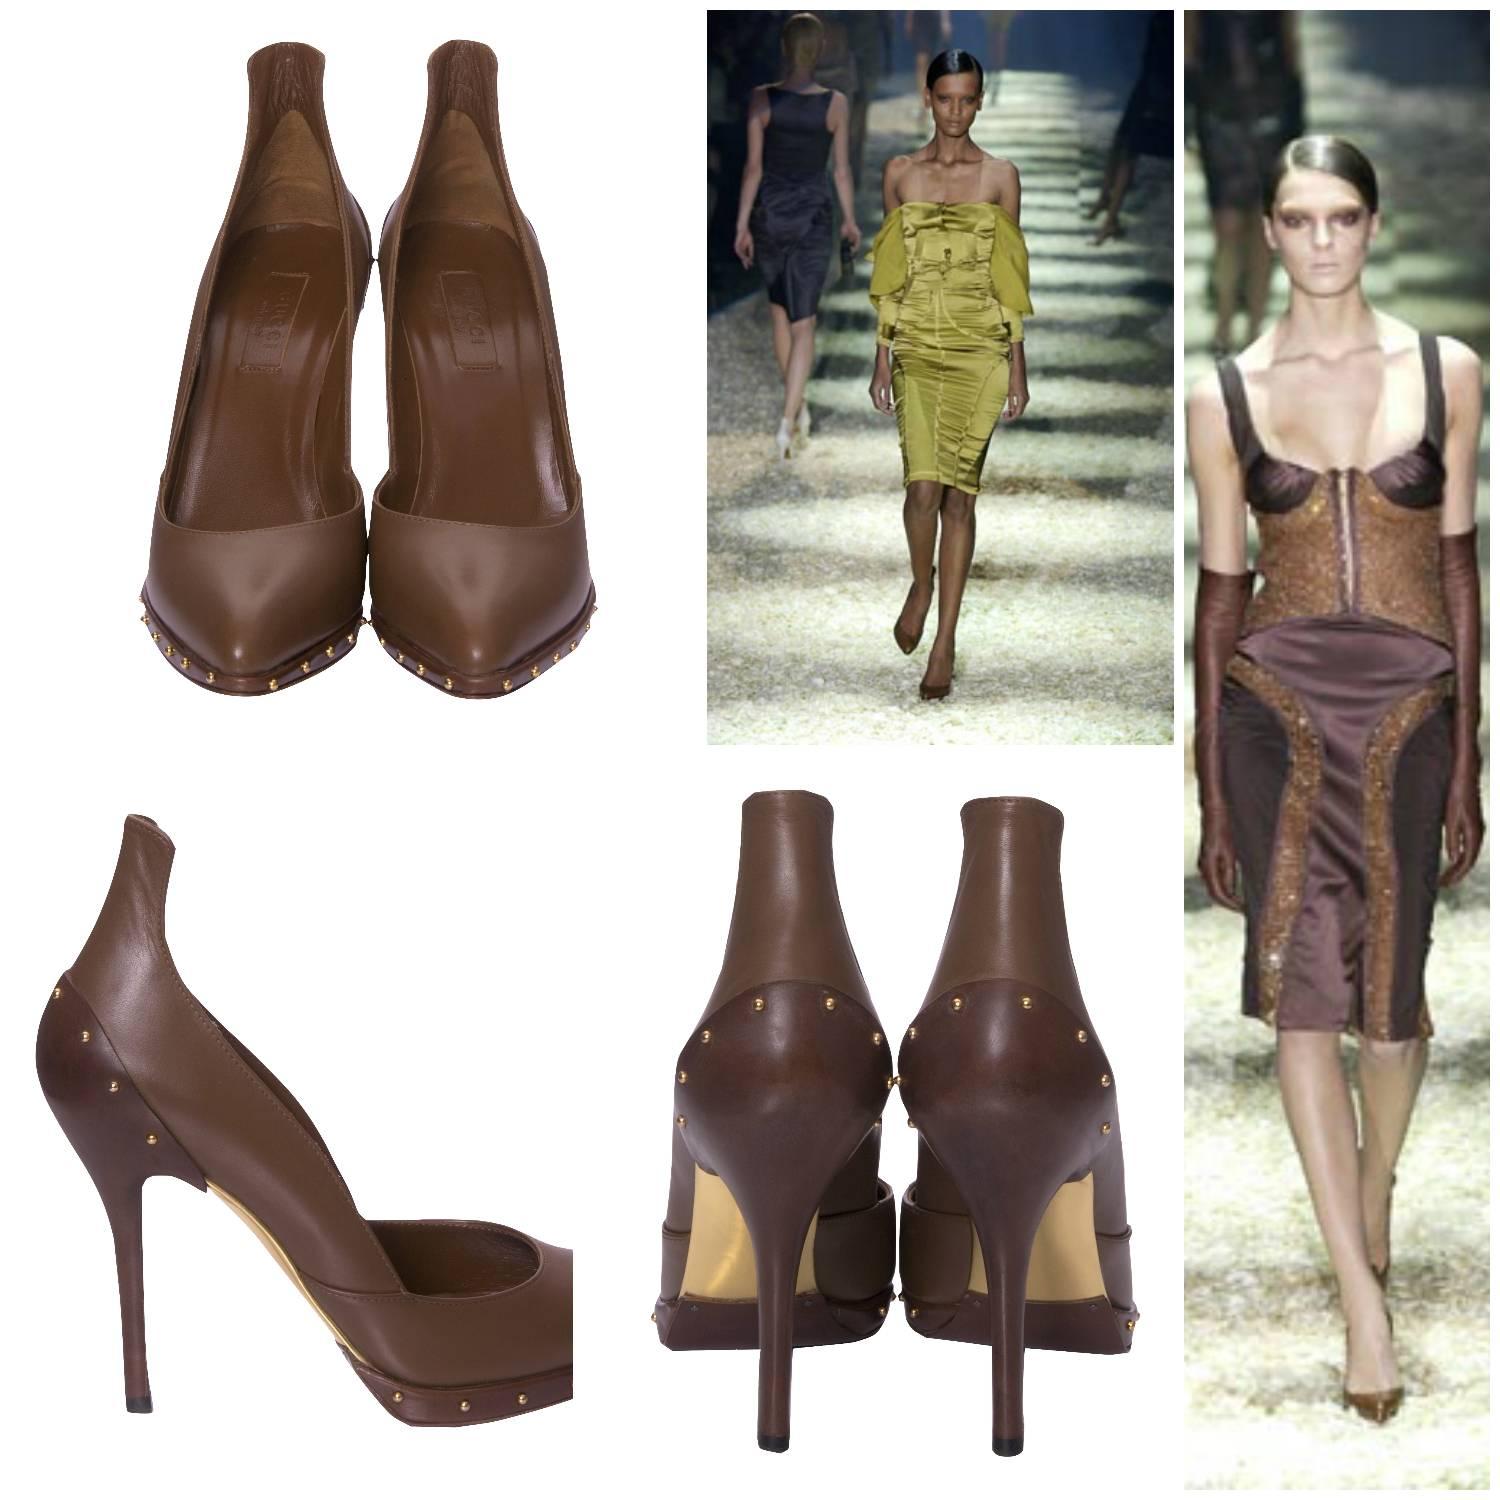 Gucci Tom Ford Heels
Fall 2003
Brand New
Rare Ad/Runway Heels Tom Ford for Gucci Fall 2003
Own a Piece of Fashion History
U.S. Size: 9.5
Brown Leather Pumps
Gold Studded Hardware
4.5